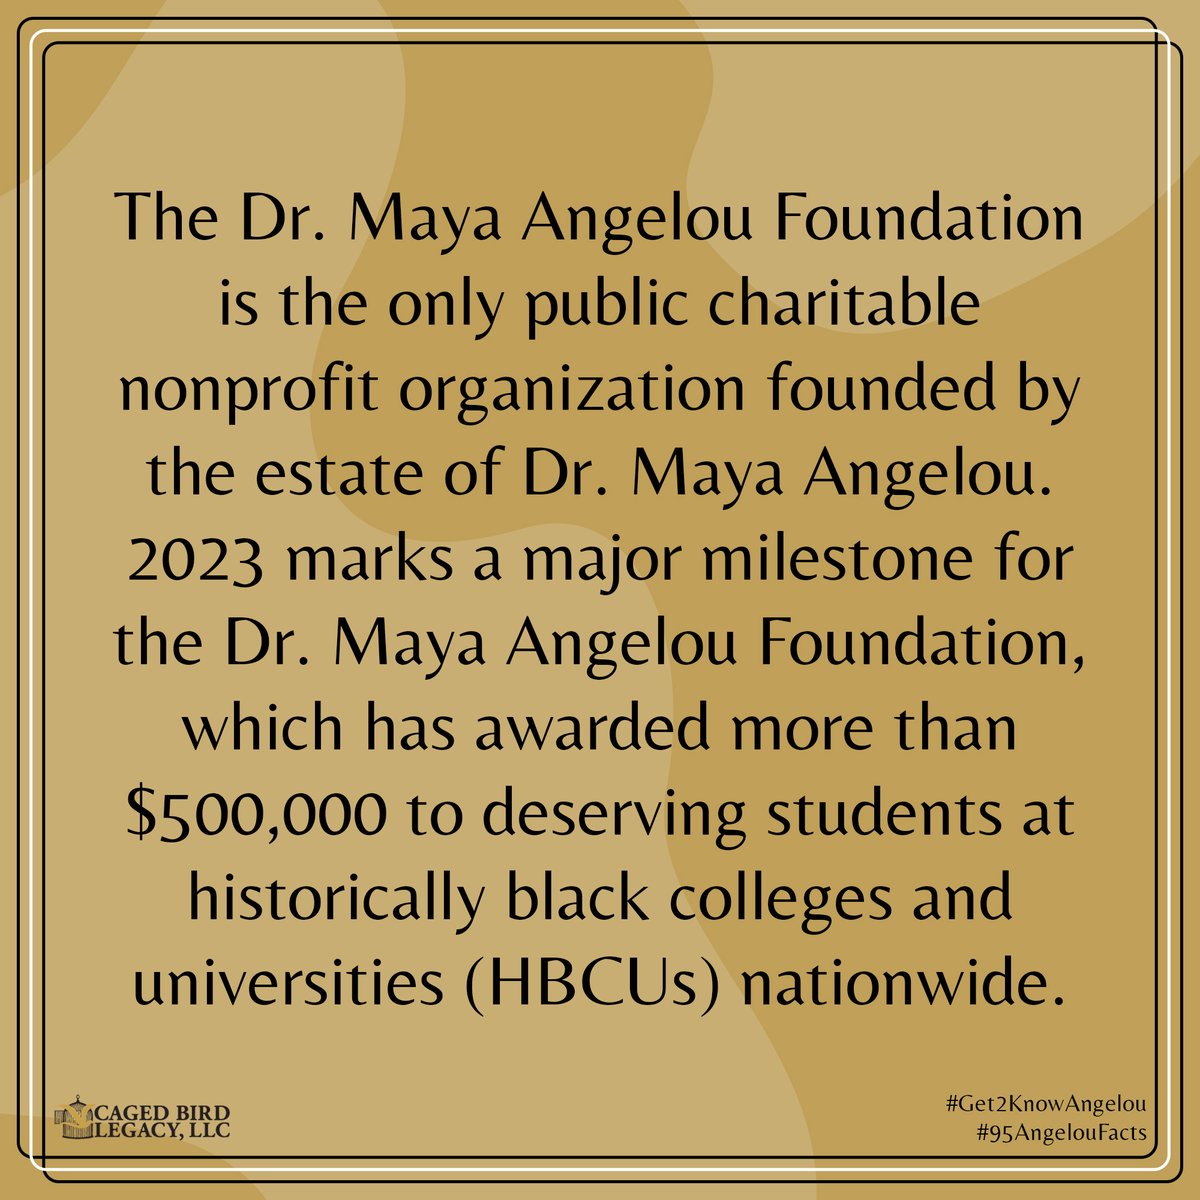 'When you learn, teach. When you get, give'. #MayaAngelou Learn more about the Dr. Maya Angelou Foundation. -The estate of Dr. Maya Angelou loom.ly/S0DnpFo